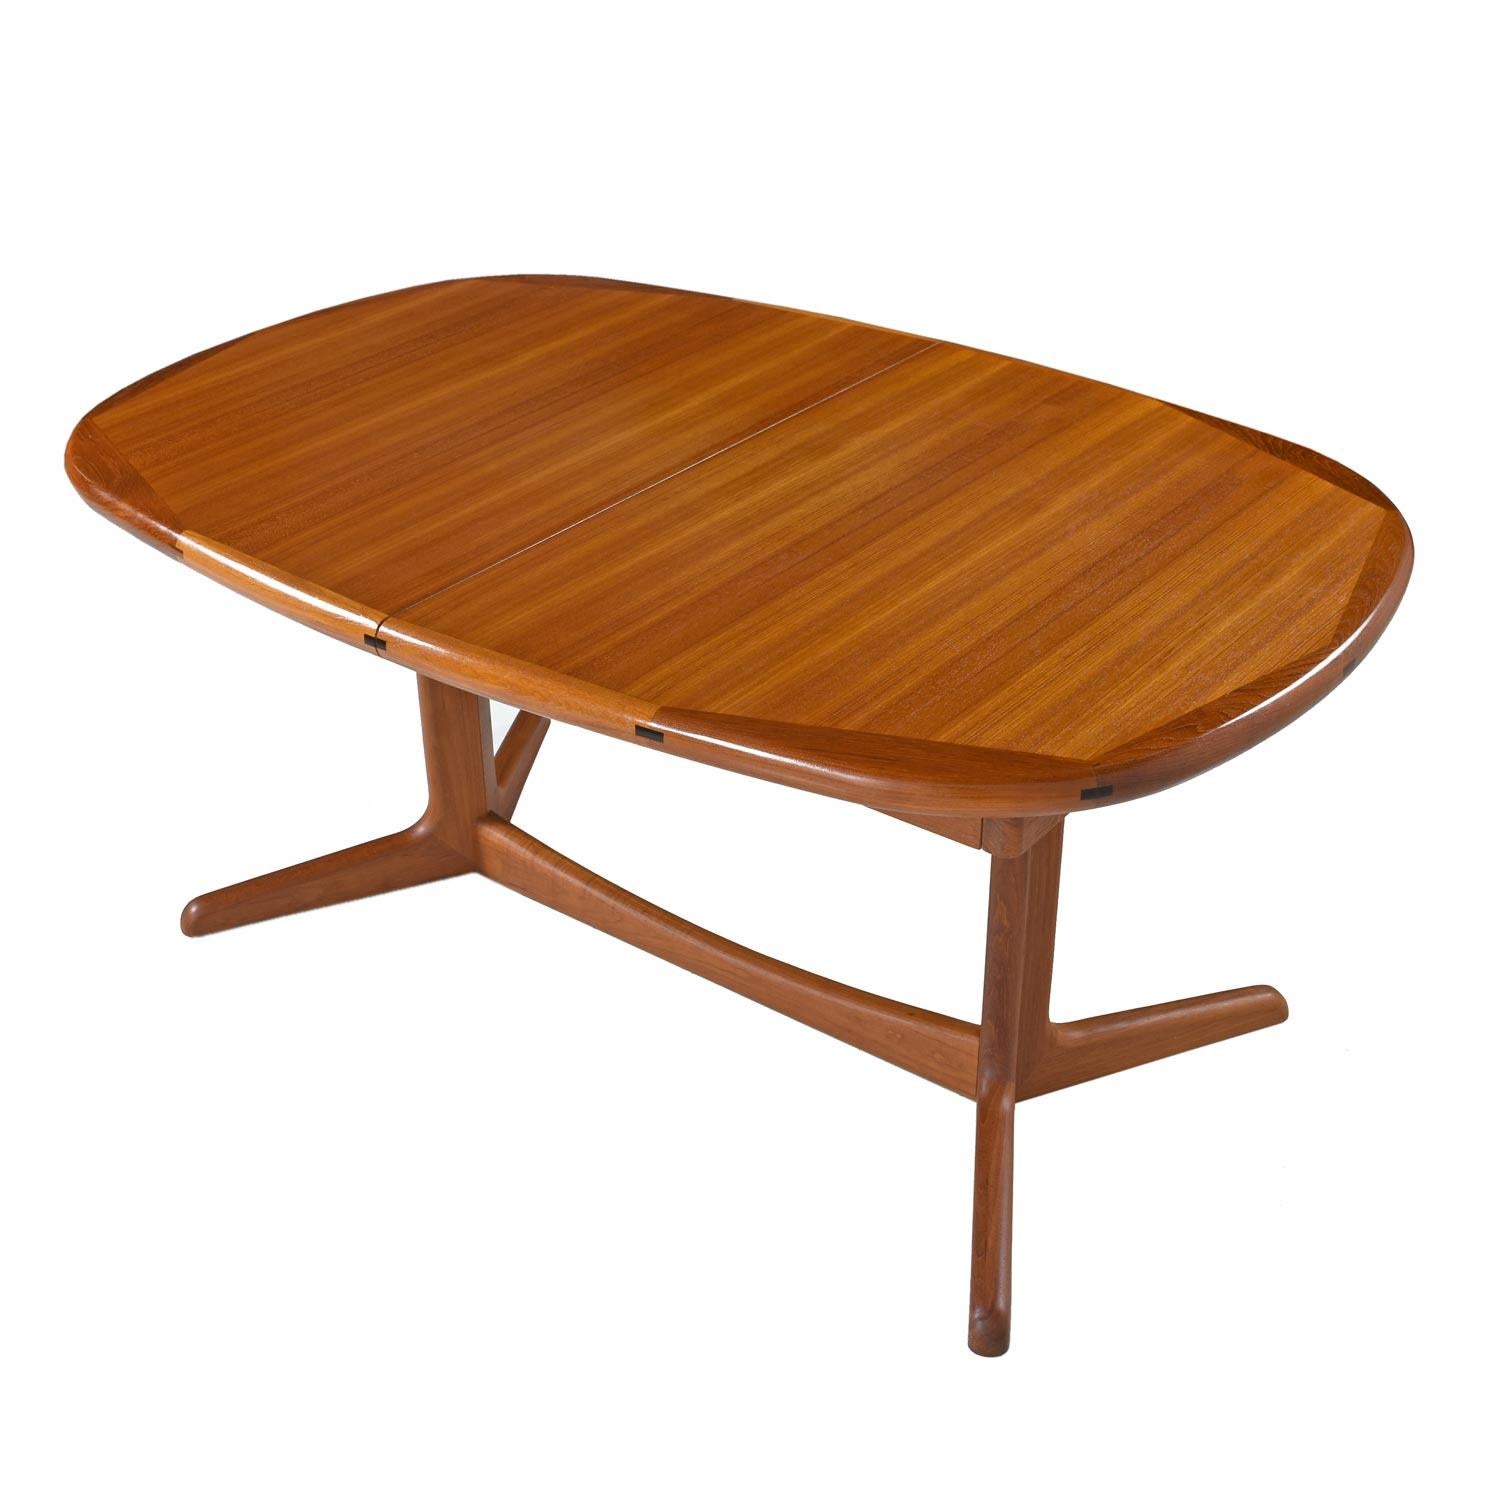 Vintage teak expanding dining table with two leaf inserts that can be stored inside. Made by Benny Linden Designs in Thailand. This versatile table allows one to customize the length by using the table at the smallest size, 62